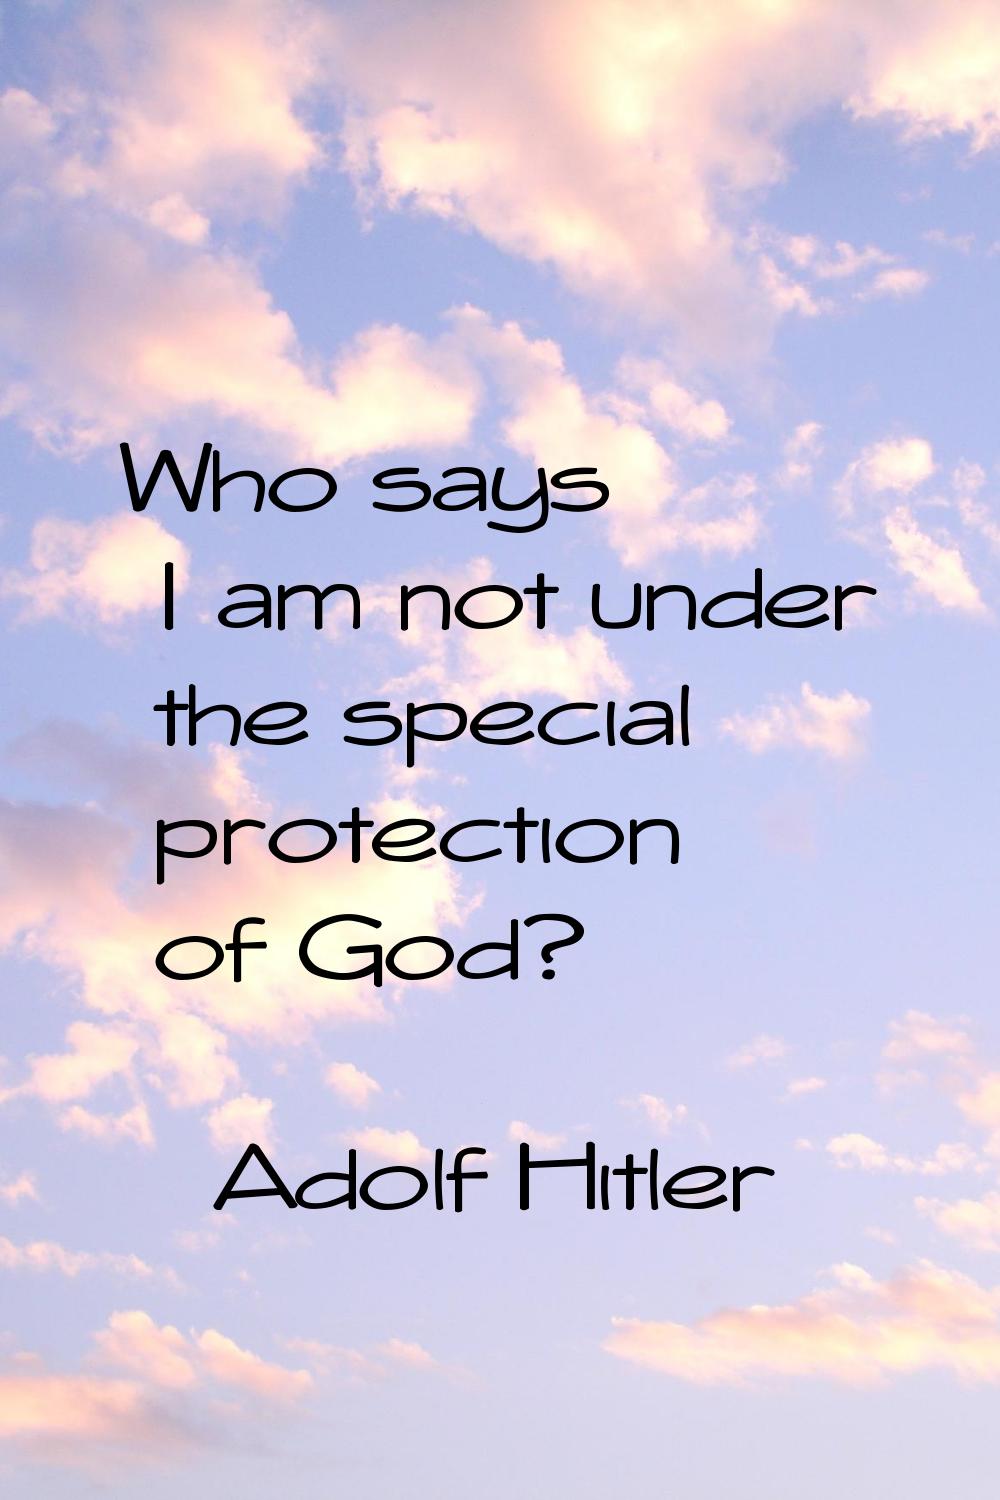 Who says I am not under the special protection of God?